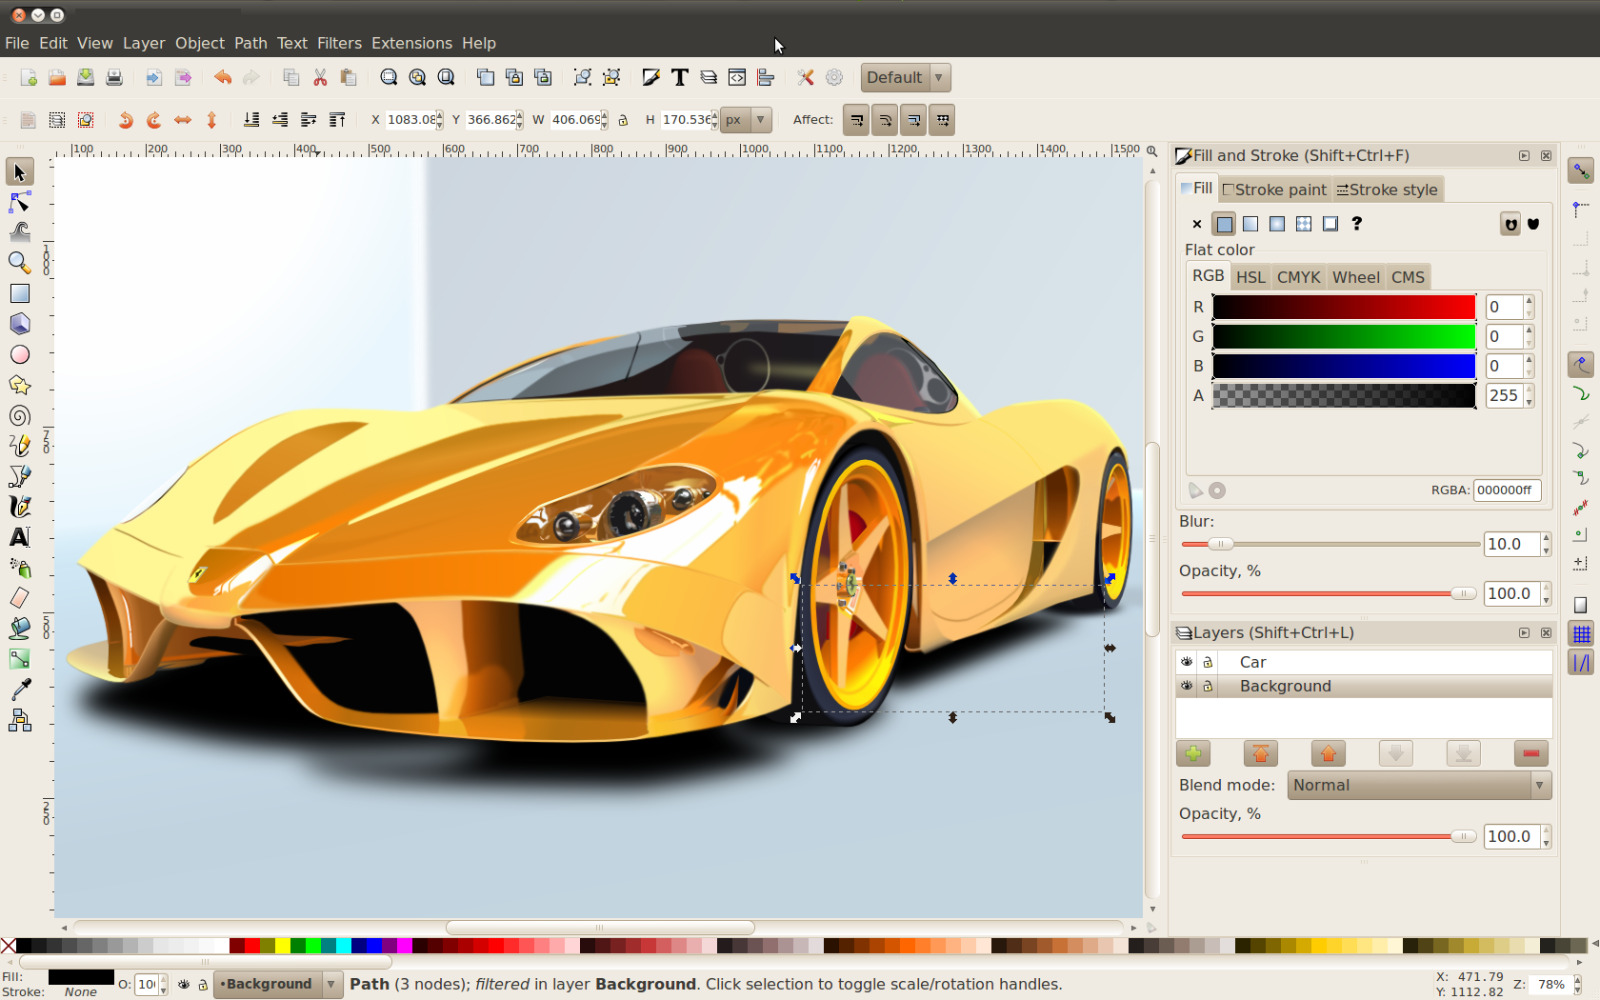  Inkscape Professional Drawing illustrator vector graphics Software for Windows 